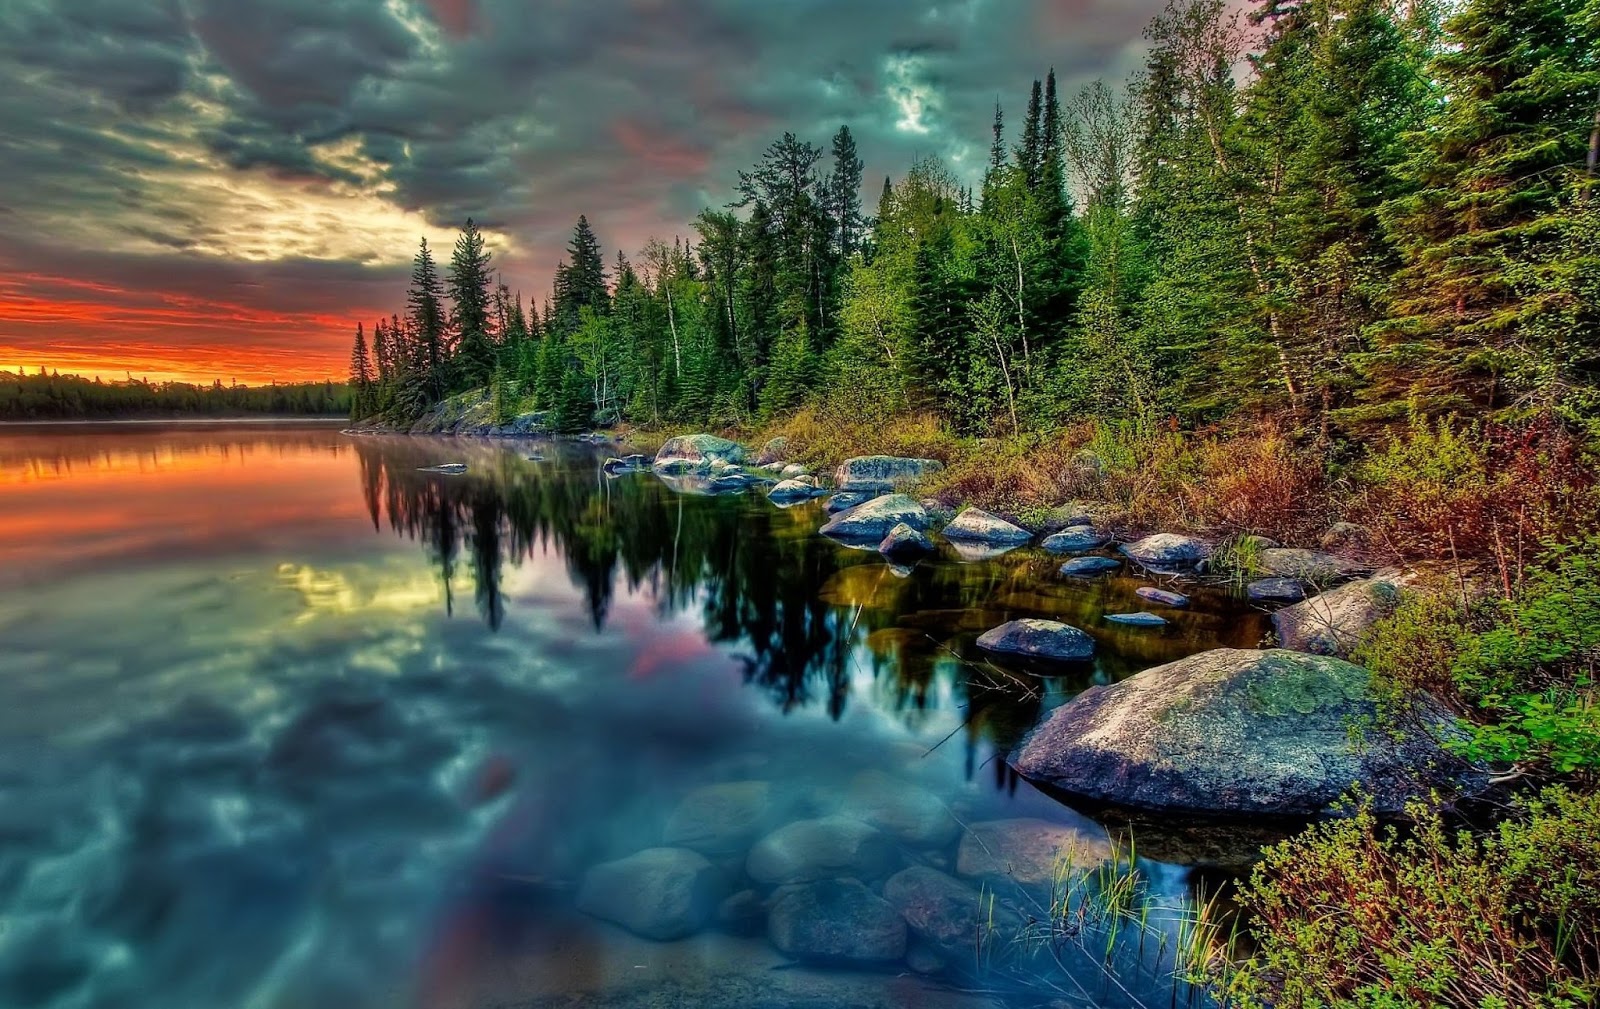  AMAZING  NATURE HD  WALLPAPERS  1080p Hd  Wallpapery